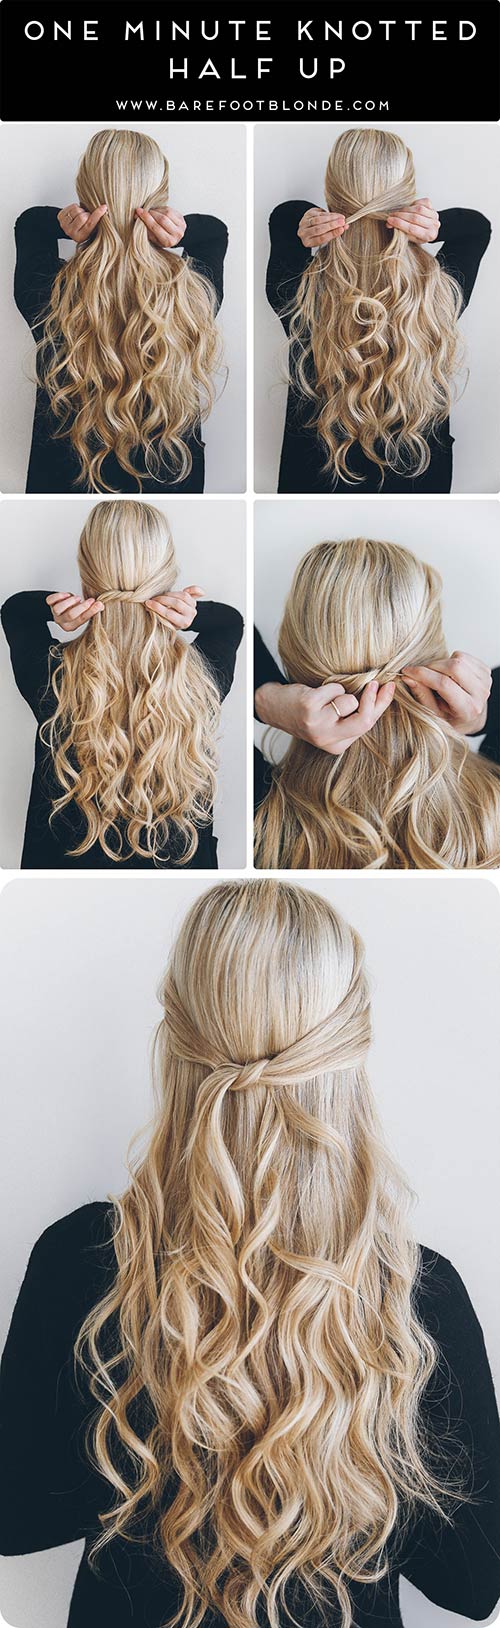 20 awesome hairstyles for girls with long hair